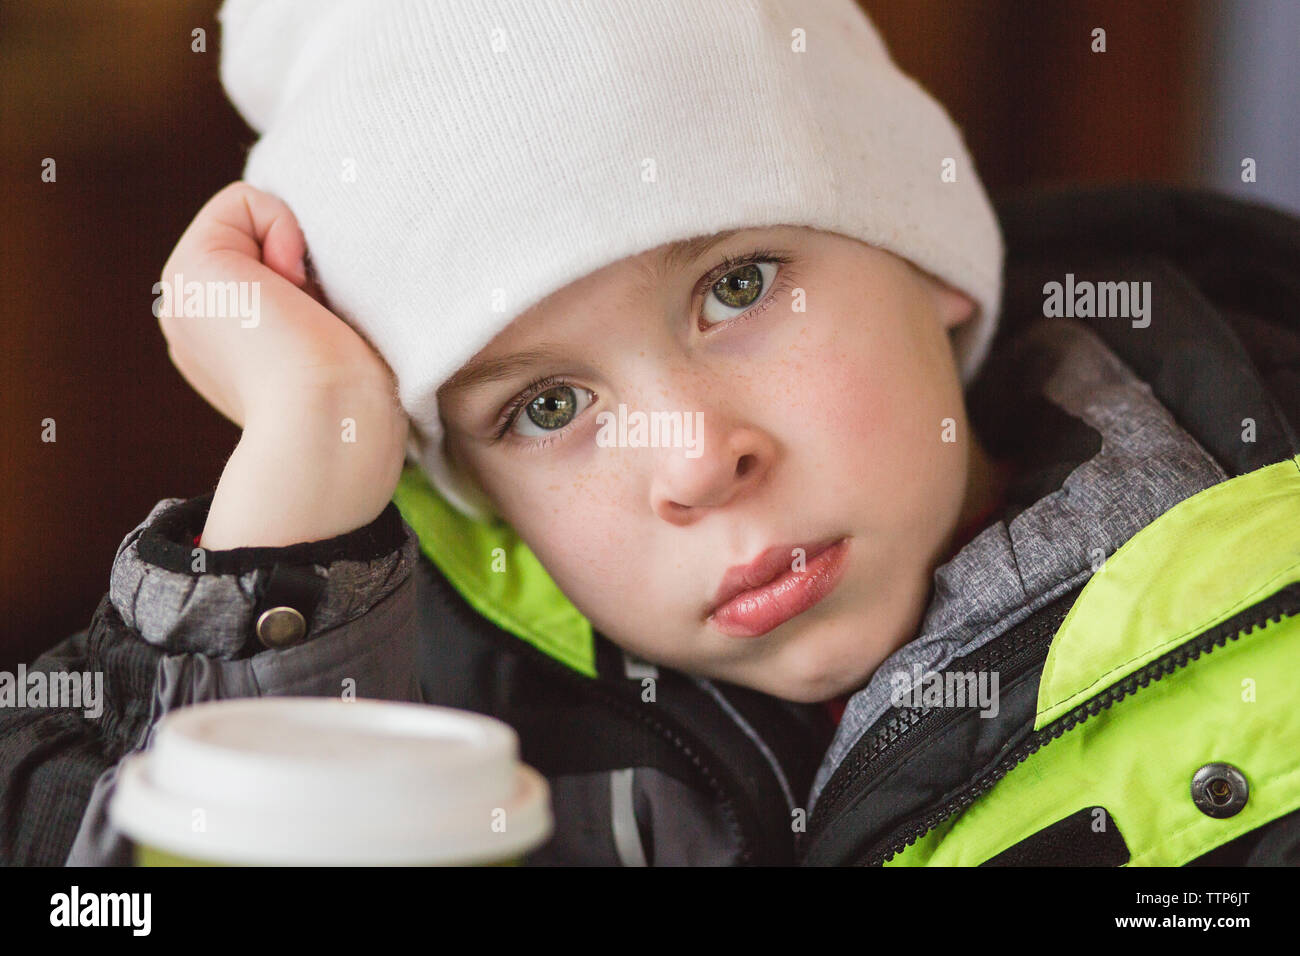 Portrait of angry boy wearing warm clothing Stock Photo